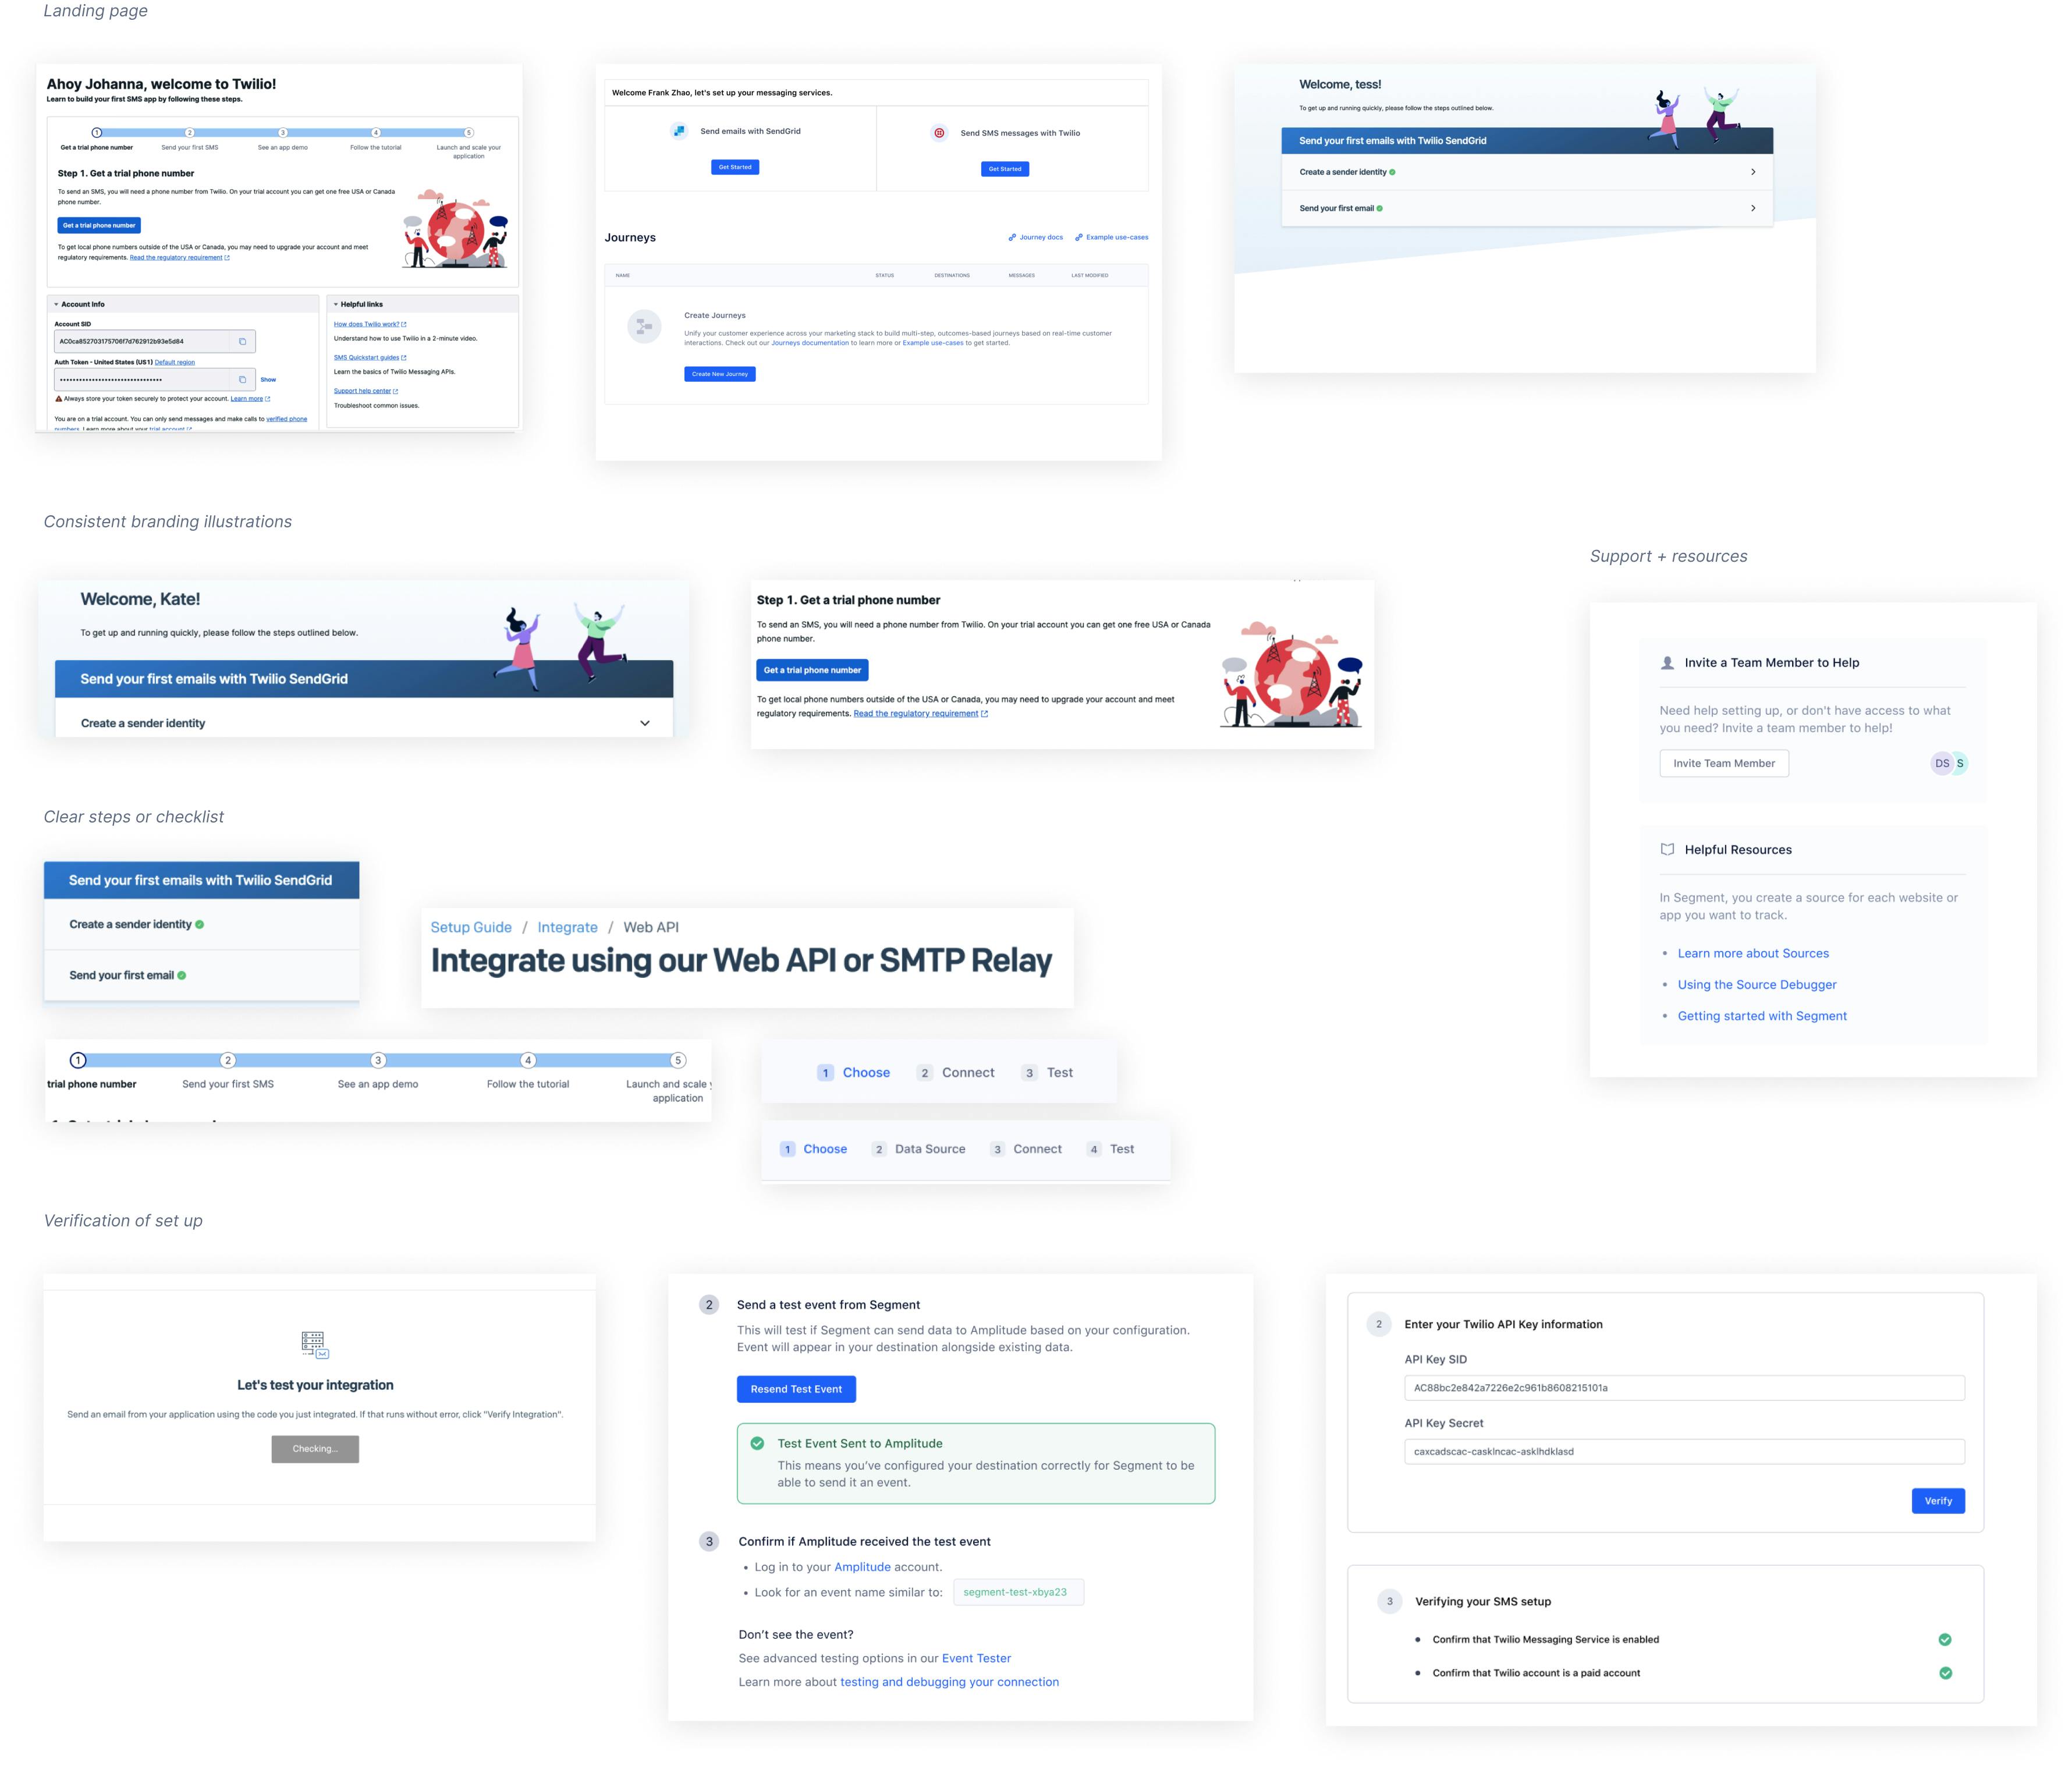 Screenshots of onboarding flows from across Segment, SendGrid, Console, and Flex.